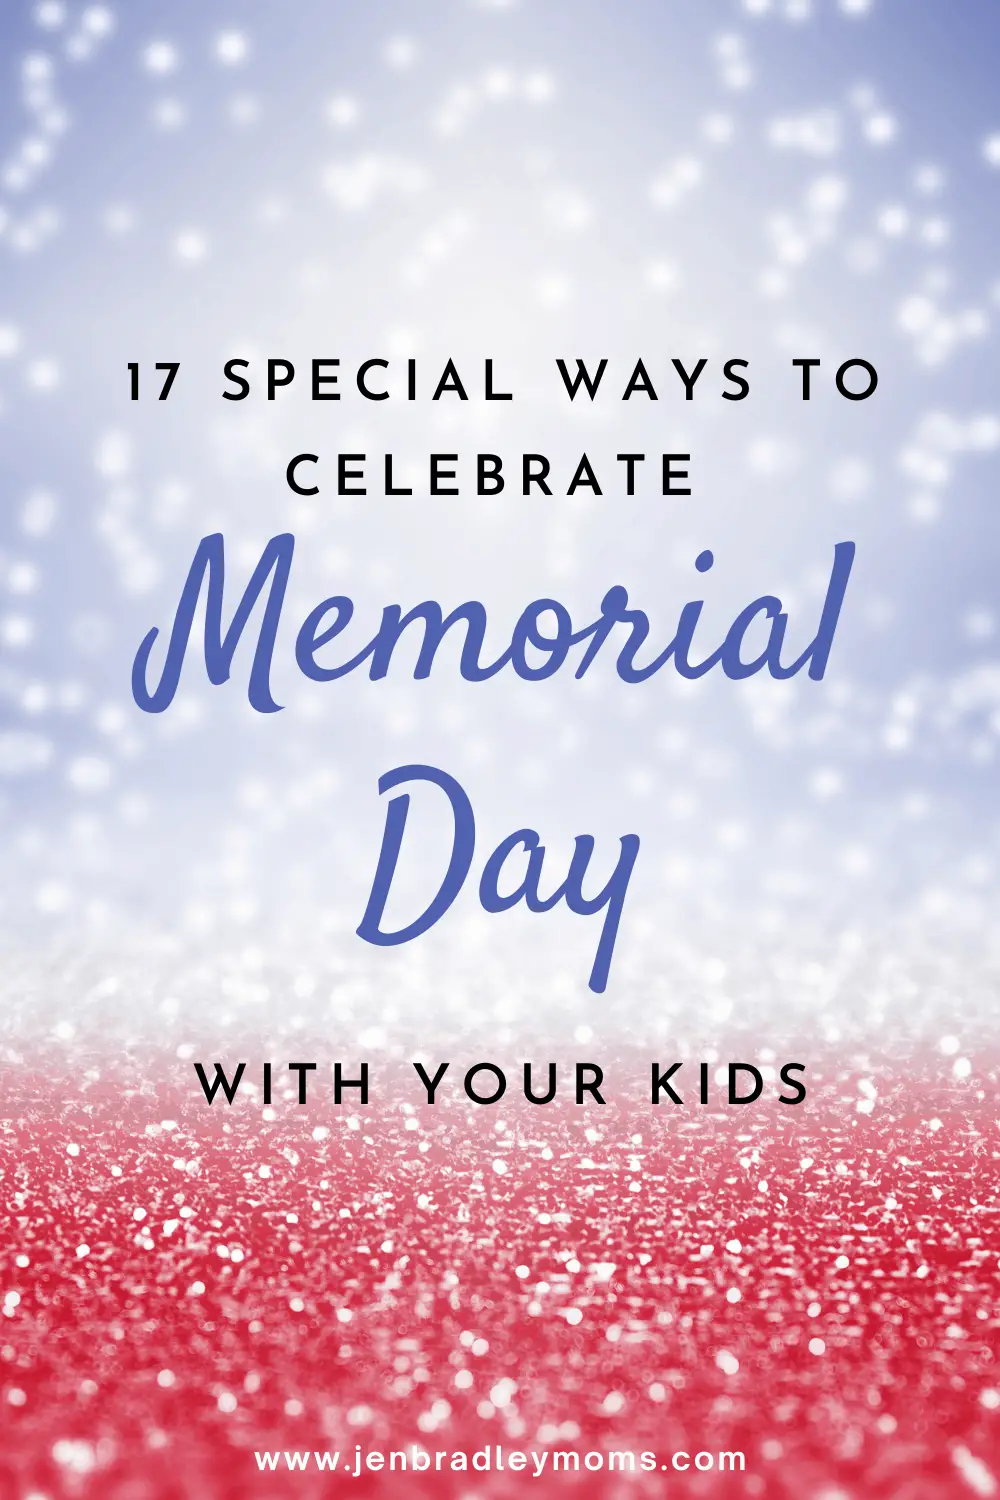 17 Awesome Patriotic Activities for Kids to do on Memorial Day